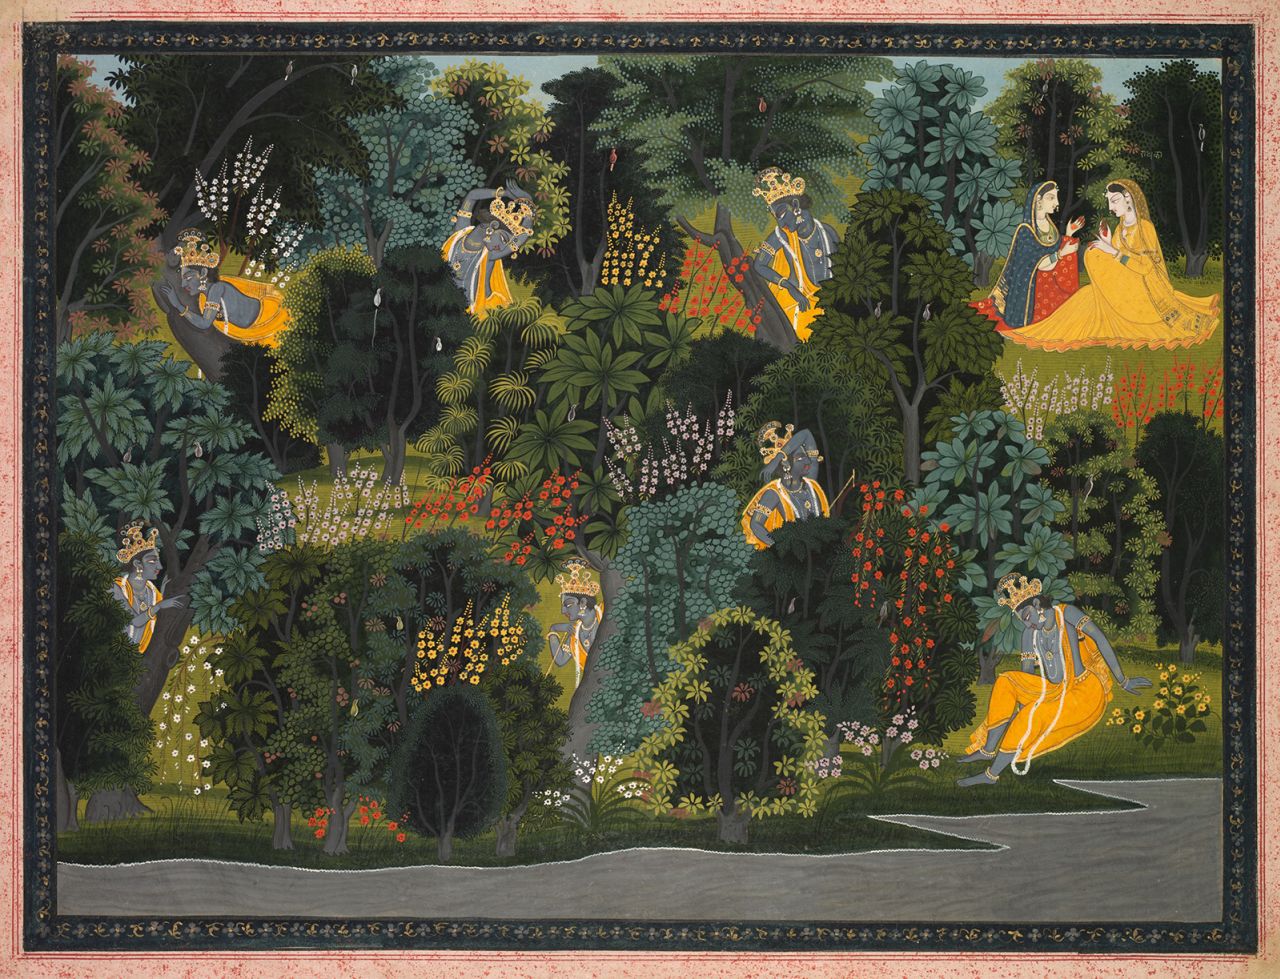 Religious and mythological art features widely, like this miniature painting illustrating a scene from the "Gita Govinda."